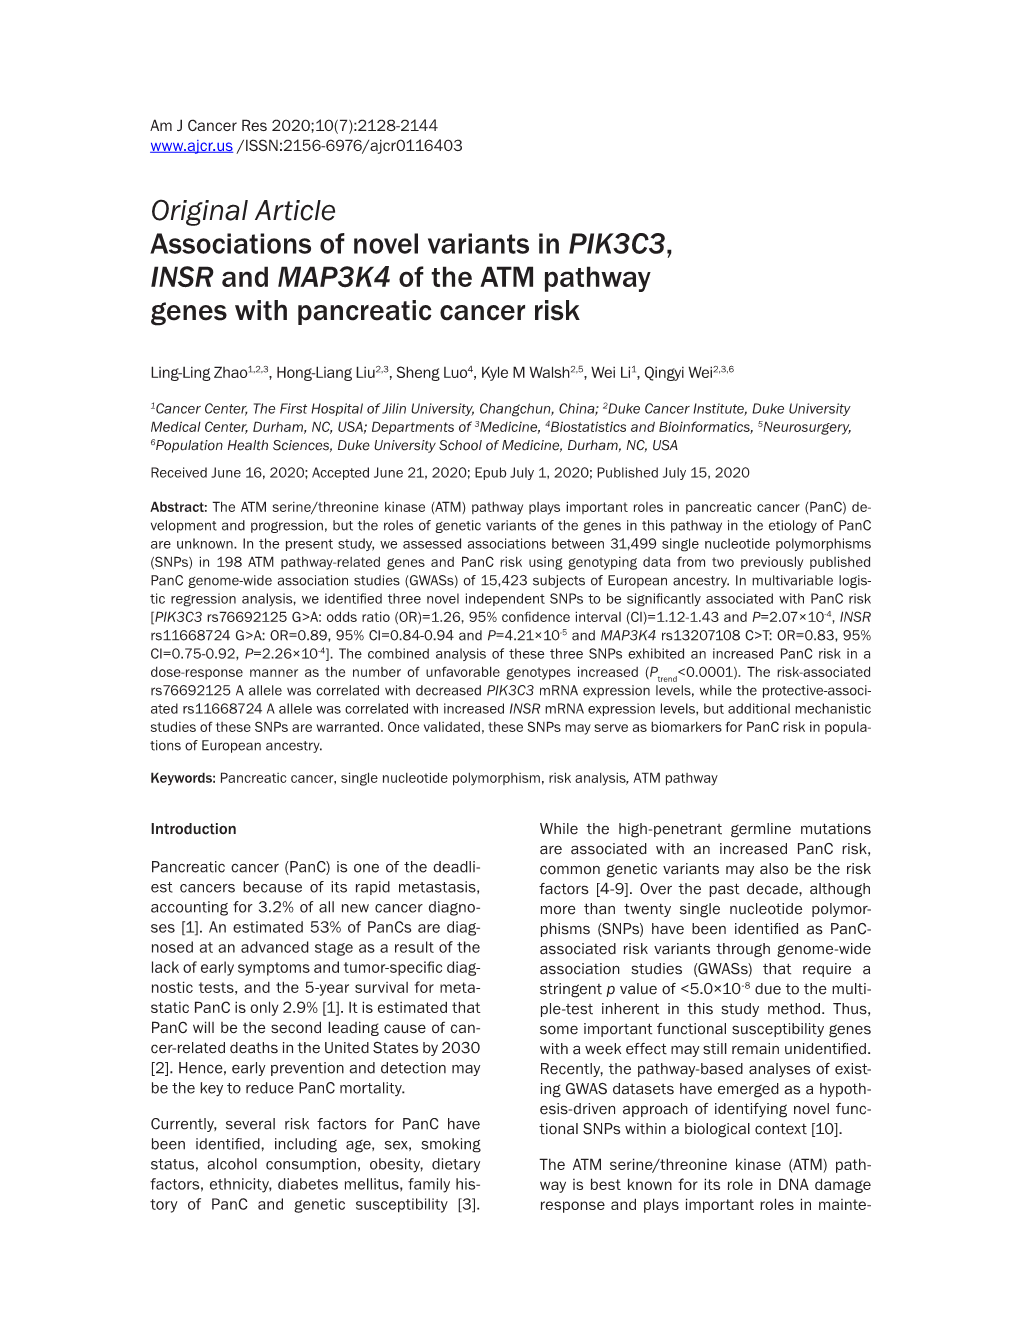 Original Article Associations of Novel Variants in PIK3C3, INSR and MAP3K4 of the ATM Pathway Genes with Pancreatic Cancer Risk